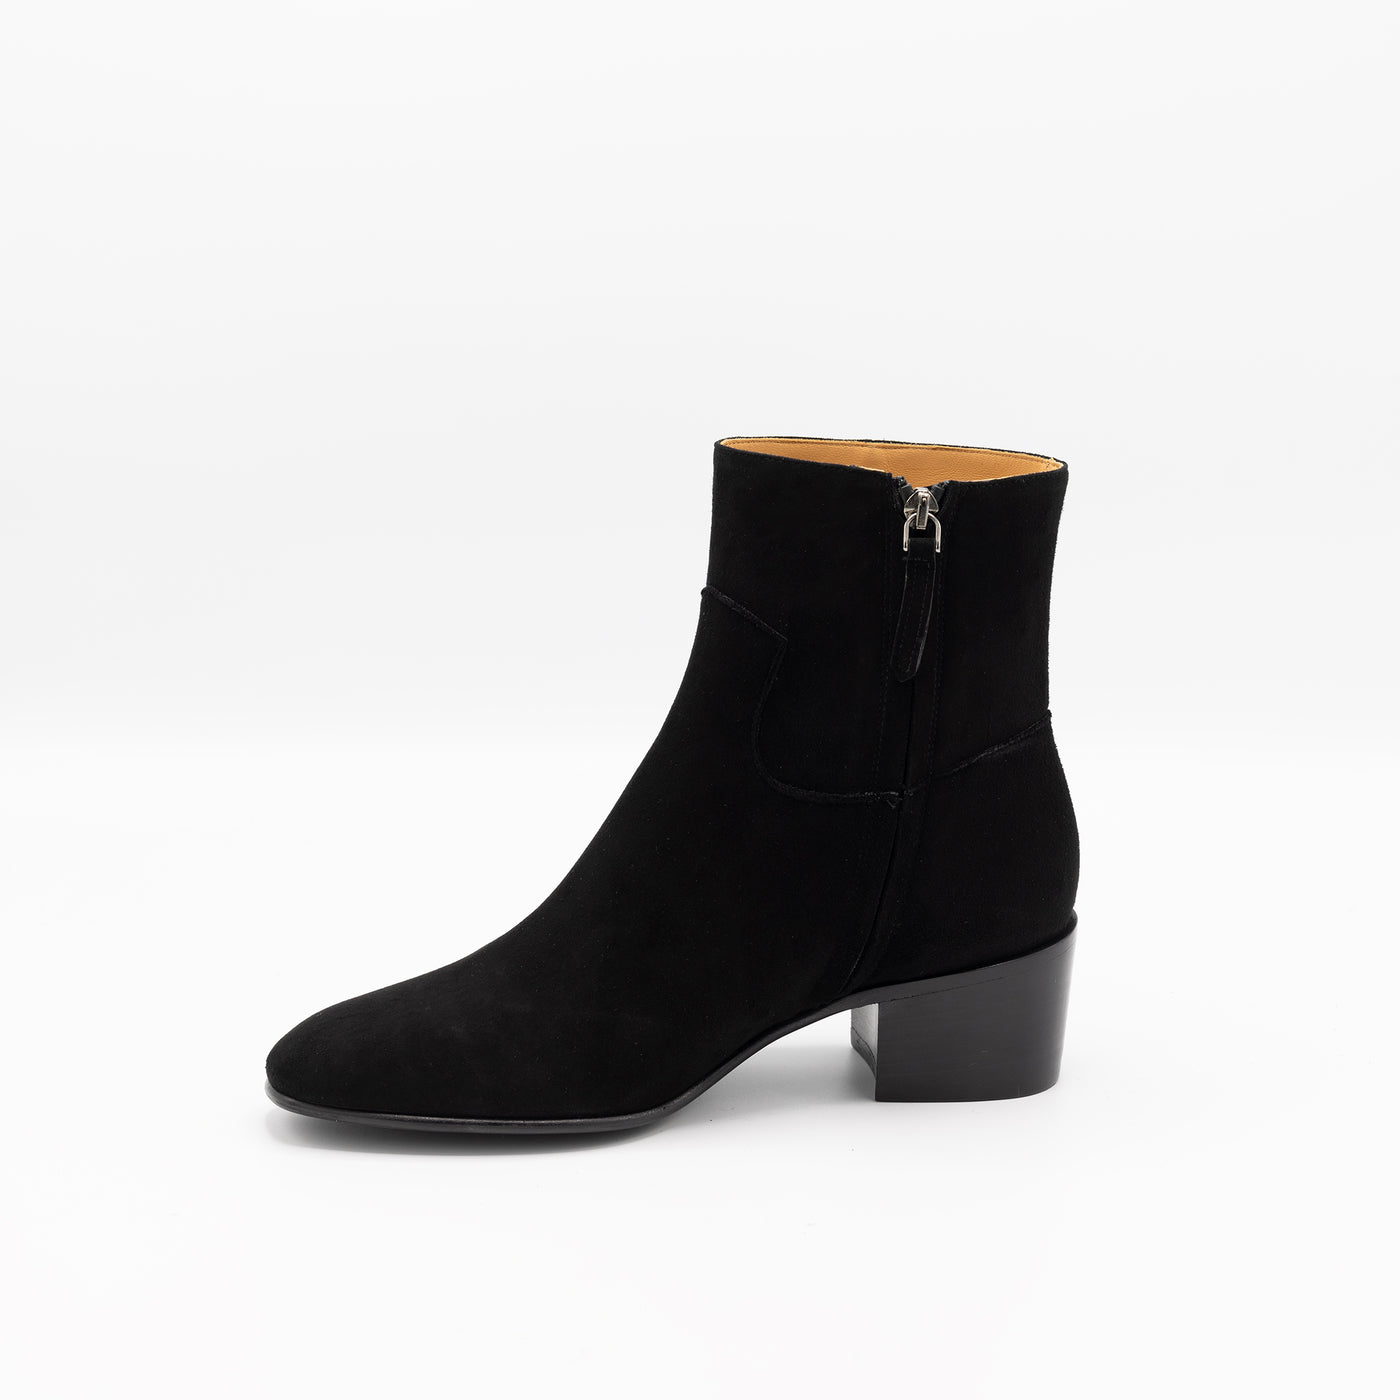 Black suede ankle boots with hidden zipper. 